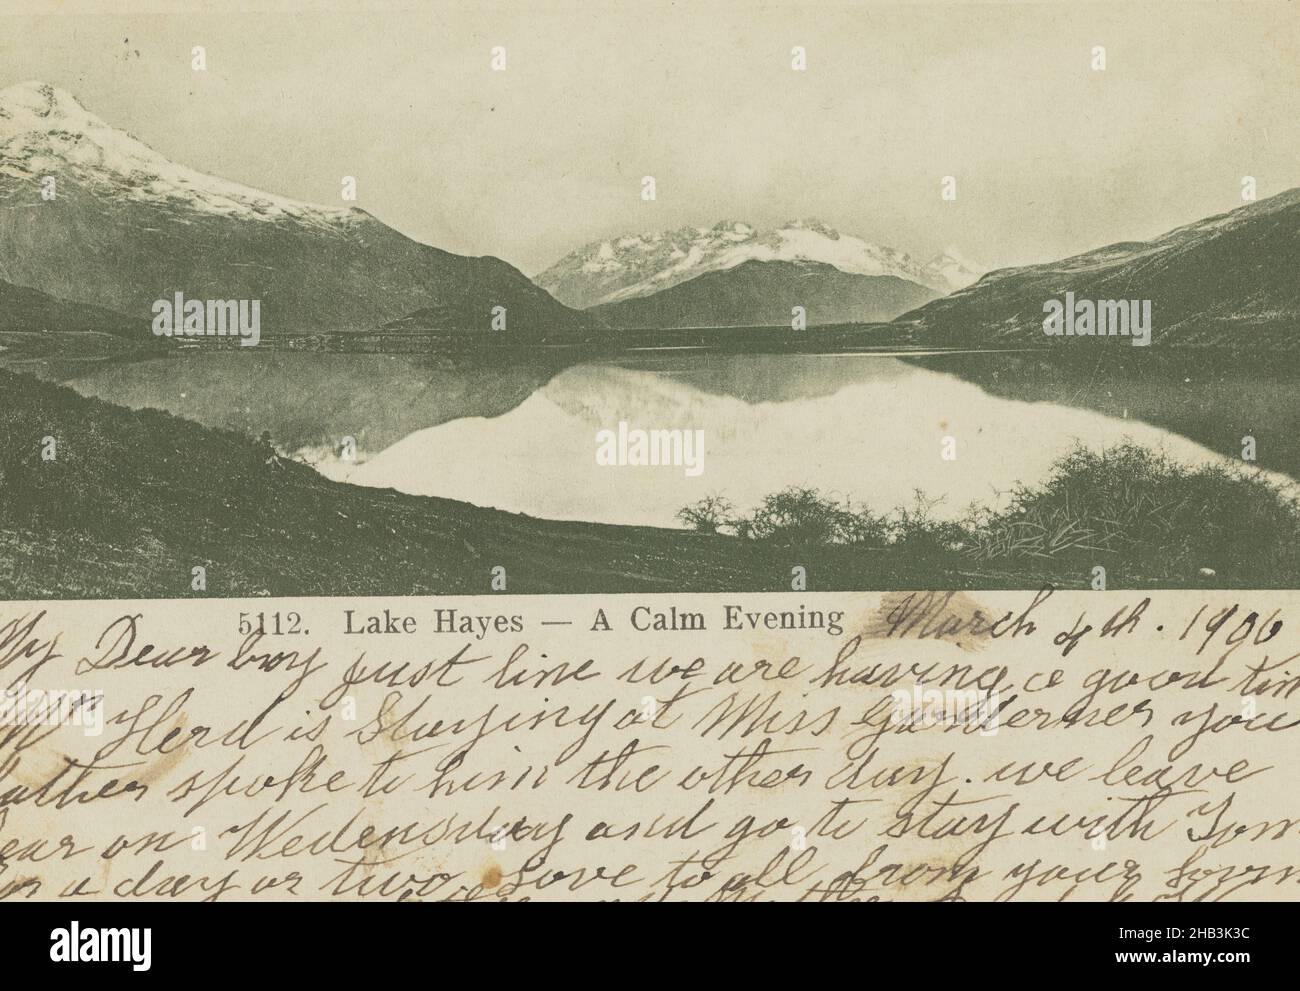 Lake Hayes, A Calm Evening, Muir & Moodie studio, publisher, 1900s, Dunedin, View looking over lake waters and towards snow capped mountains in the distance. Handwritten message is dated 4 March 1906. Card is addressed to: W. Wilkinson, 231 Tuam Street, Christchurch. The card was posted 5 March 1906 at Queenstown Stock Photo